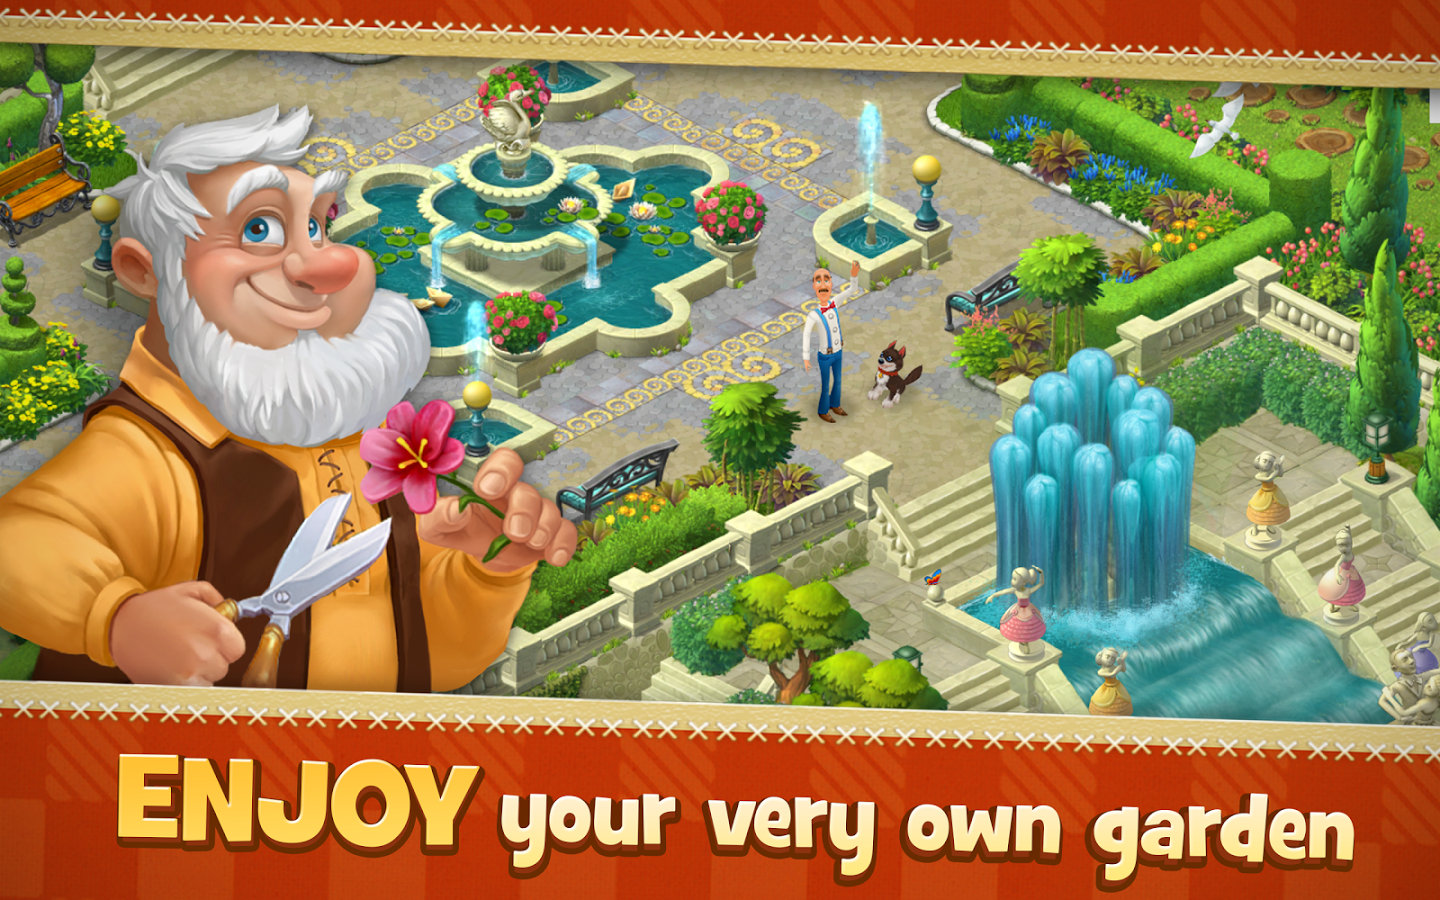 gardenscapes new acres cheats download